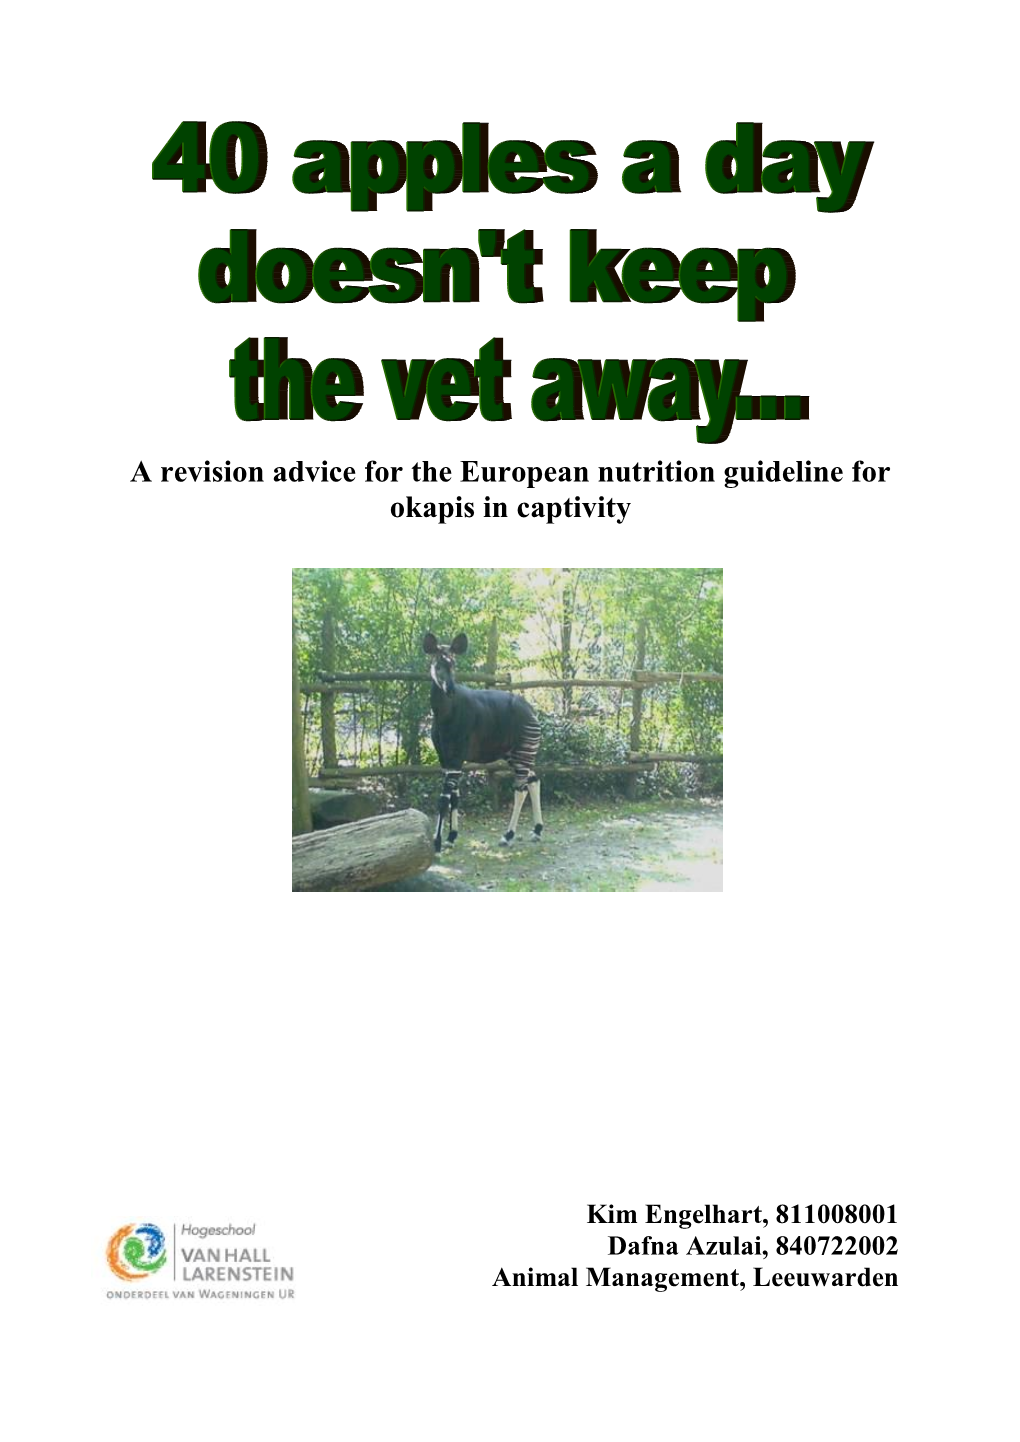 A Revision Advice for the European Nutrition Guideline for Okapis in Captivity